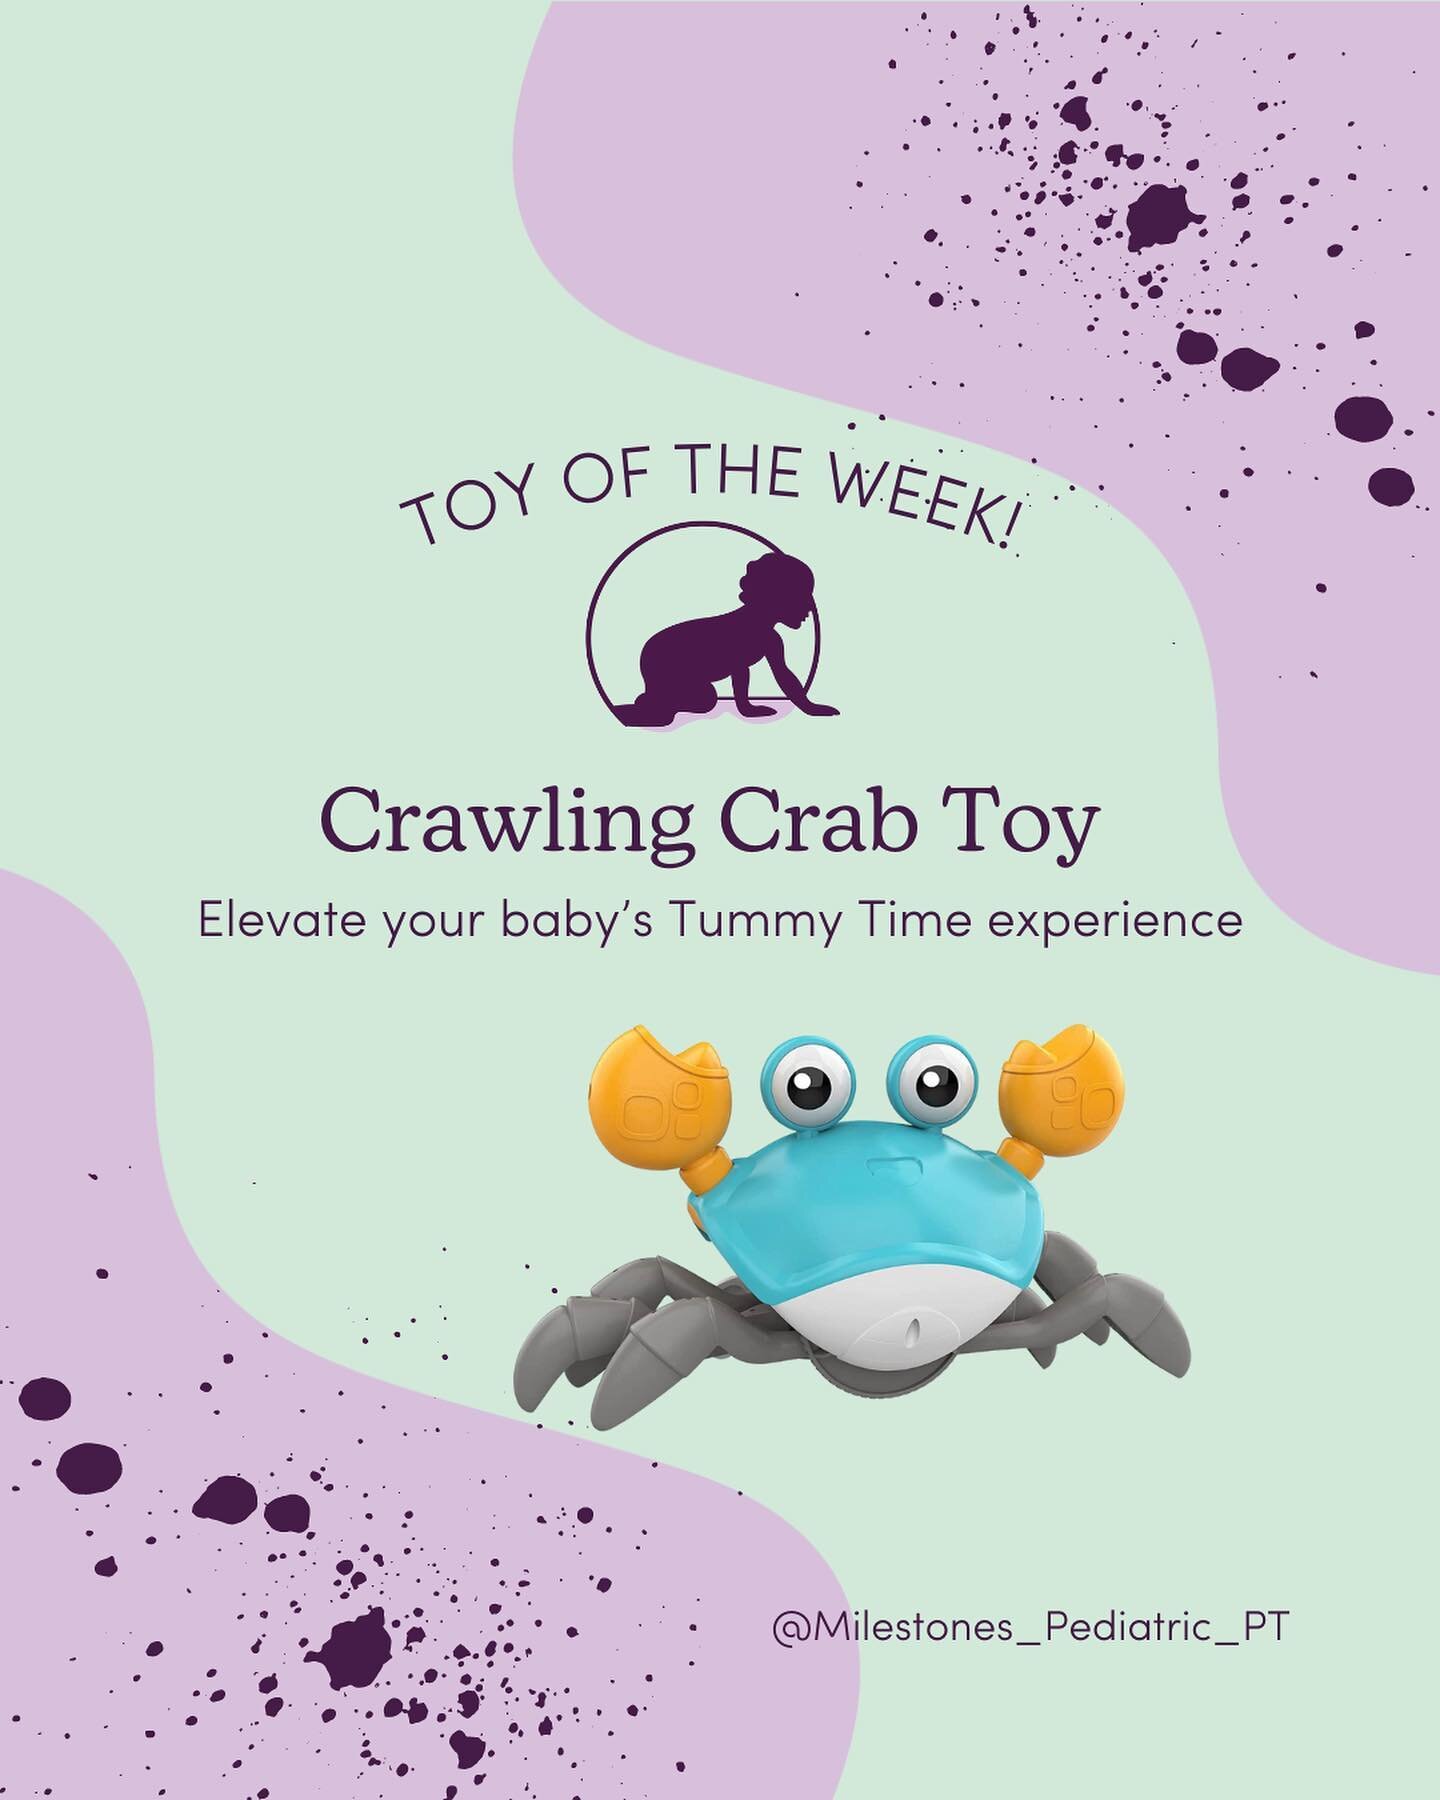 🦀 Toy of the Week 🦀 
Hi! I am Vera, doctor of physical therapy and a national board certified pediatric specialist! I help educate parents on important pediatric milestones, recommend activities and toys, navigate through the challenges of parentin